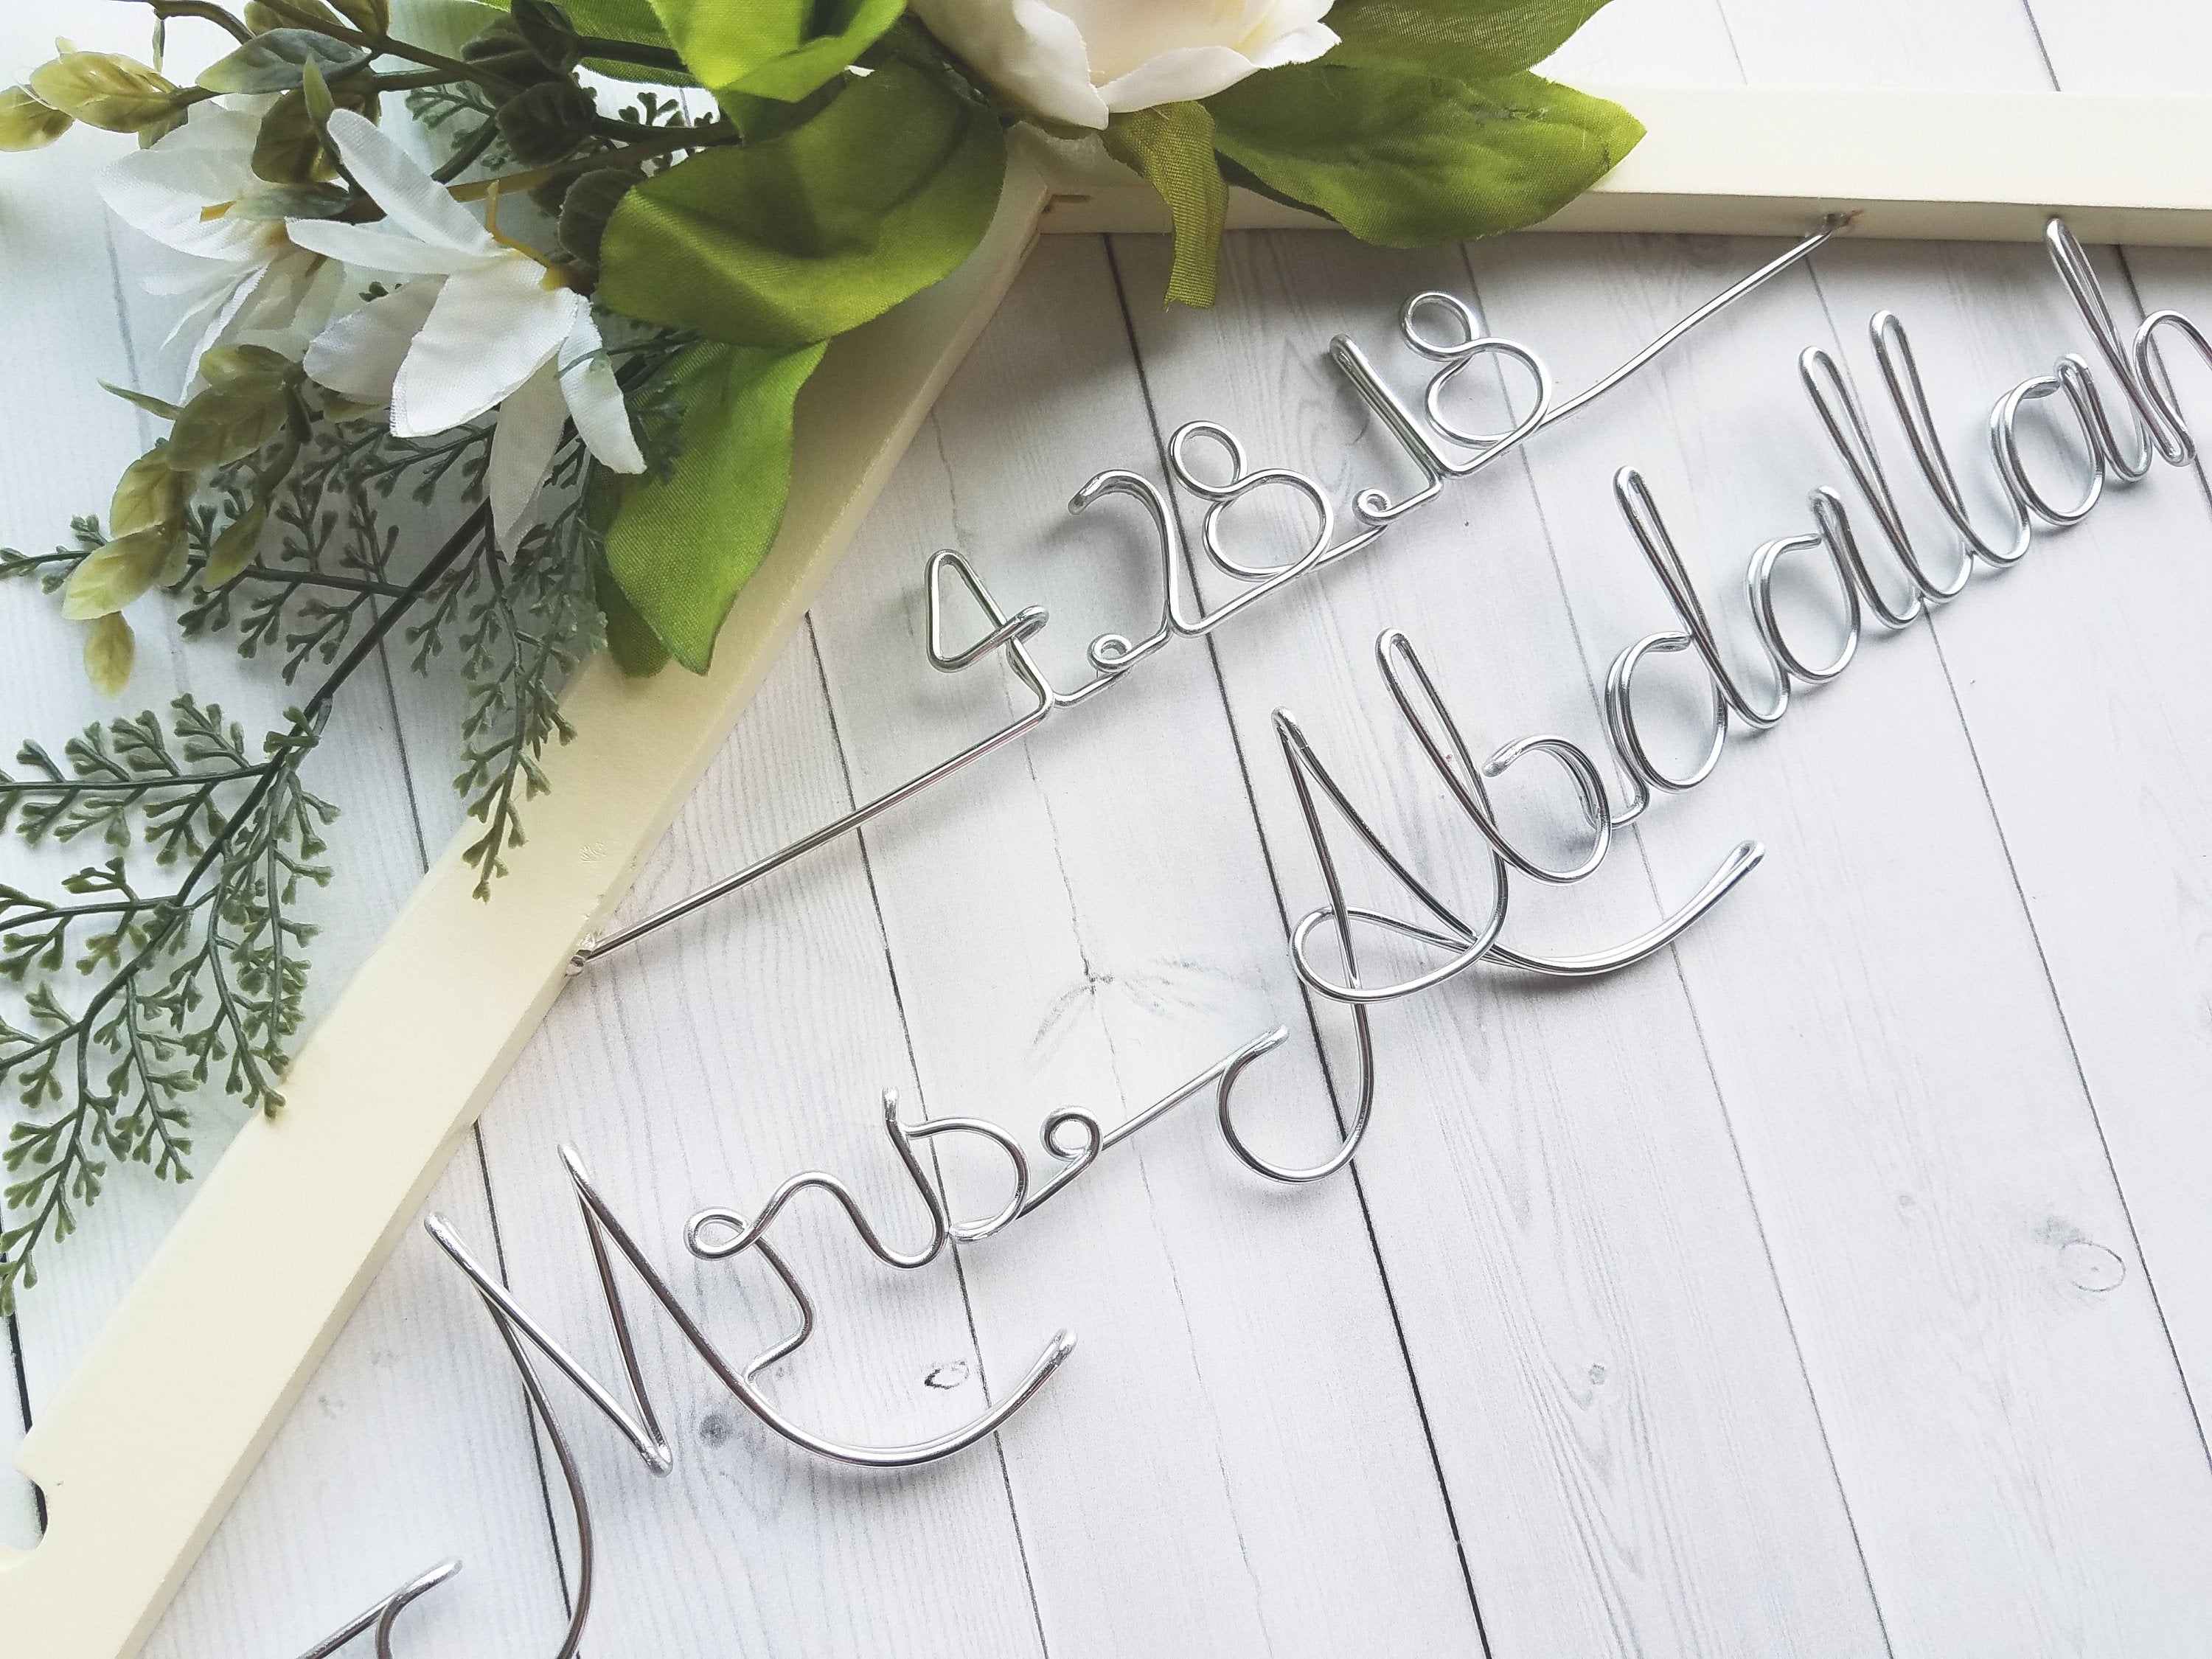 Wedding Hanger With Date Flowers